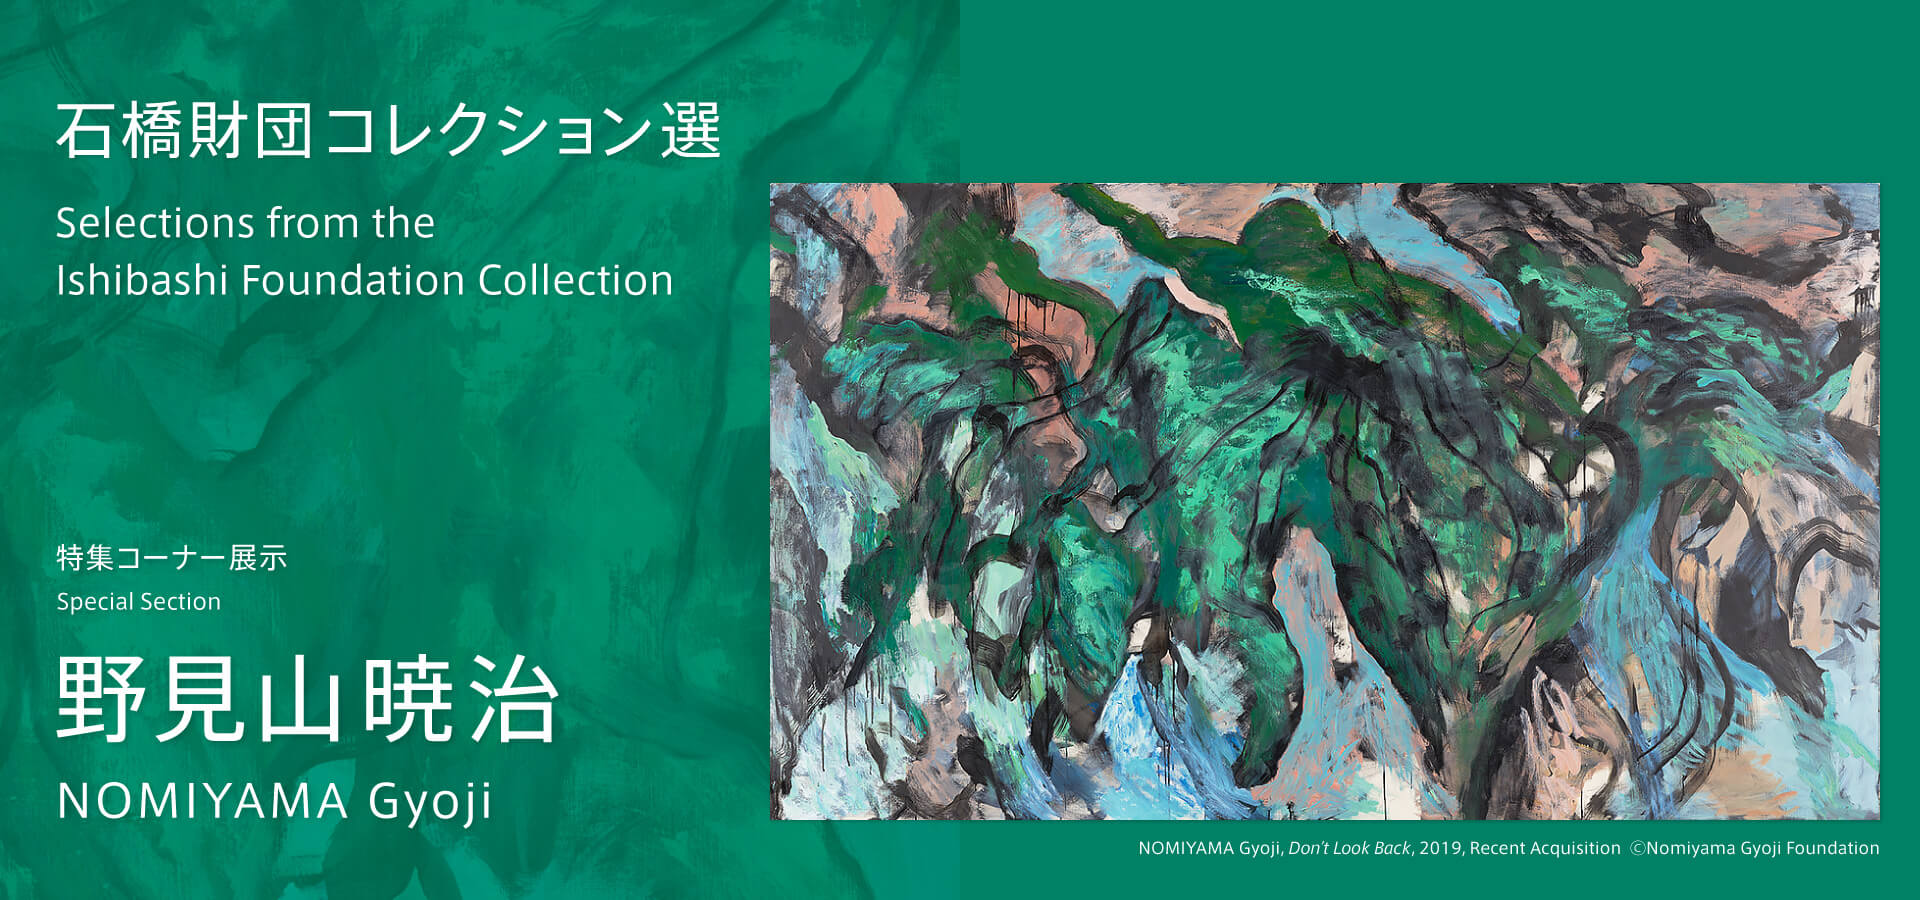 Selections from the Ishibashi Foundation Collection Special Section NOMIYAMA Gyoji